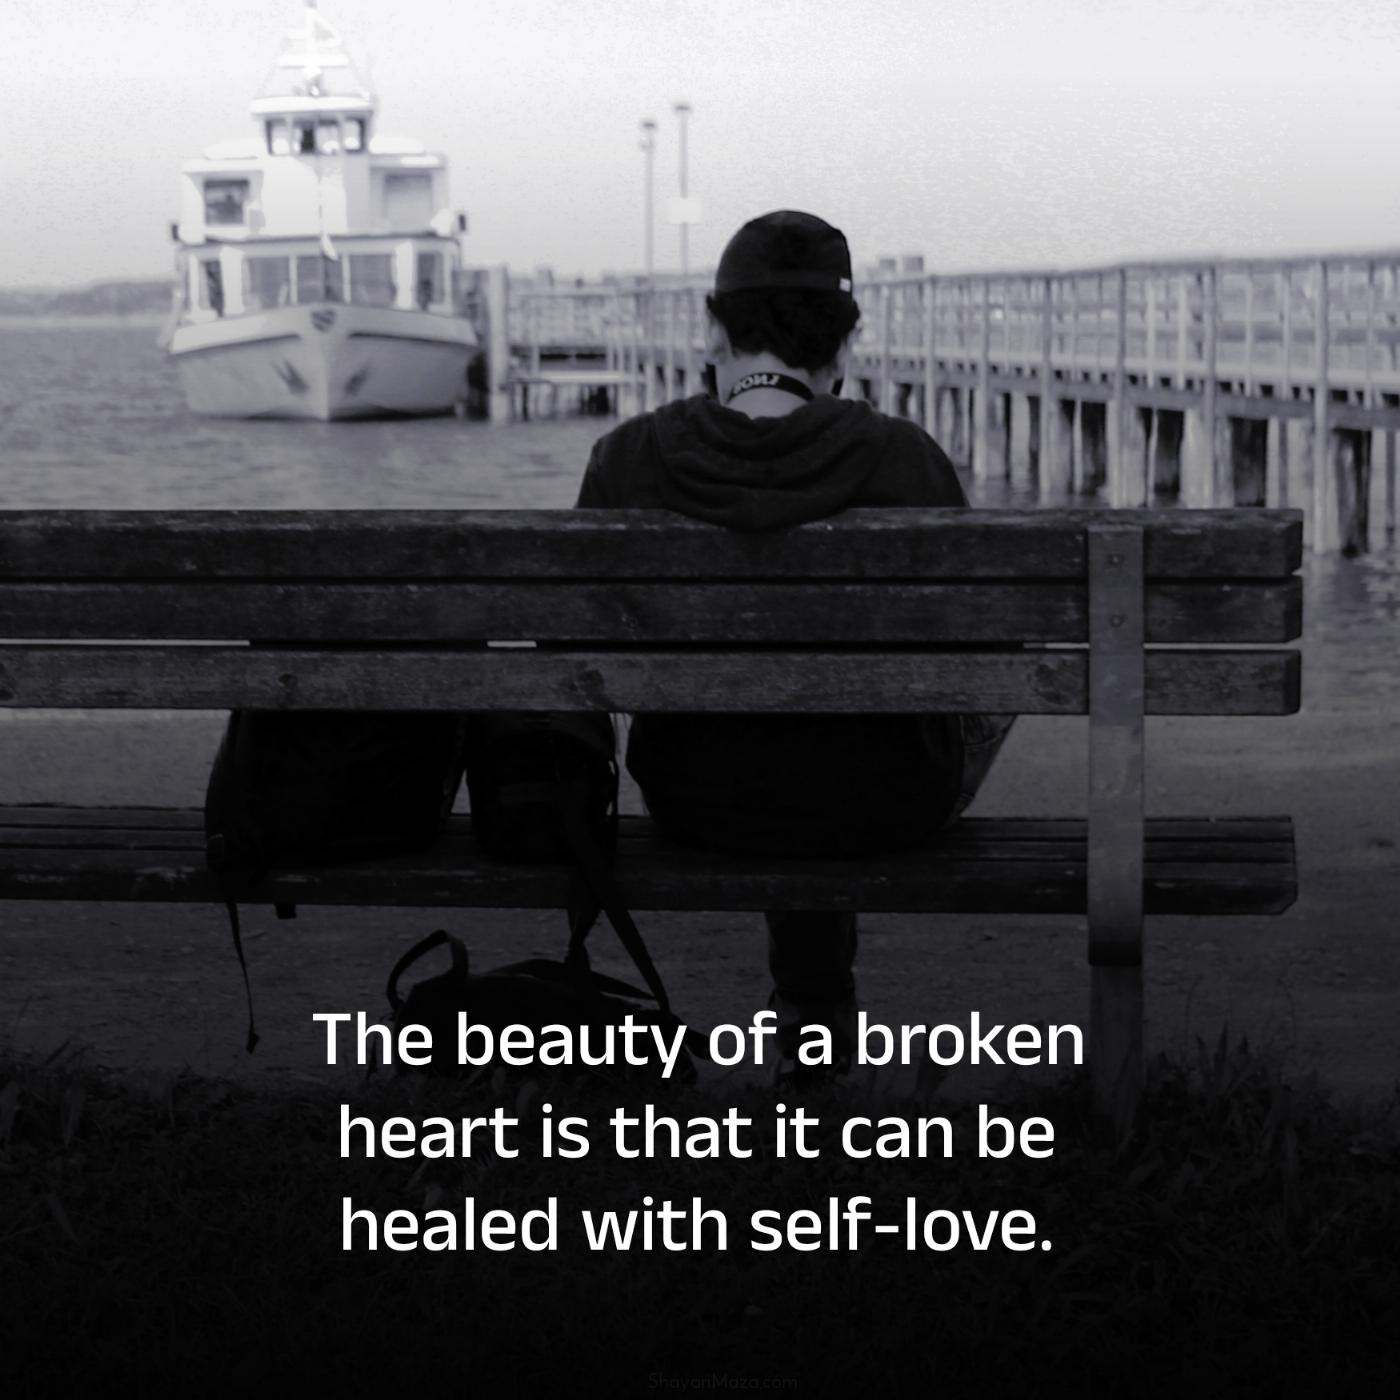 The beauty of a broken heart is that it can be healed